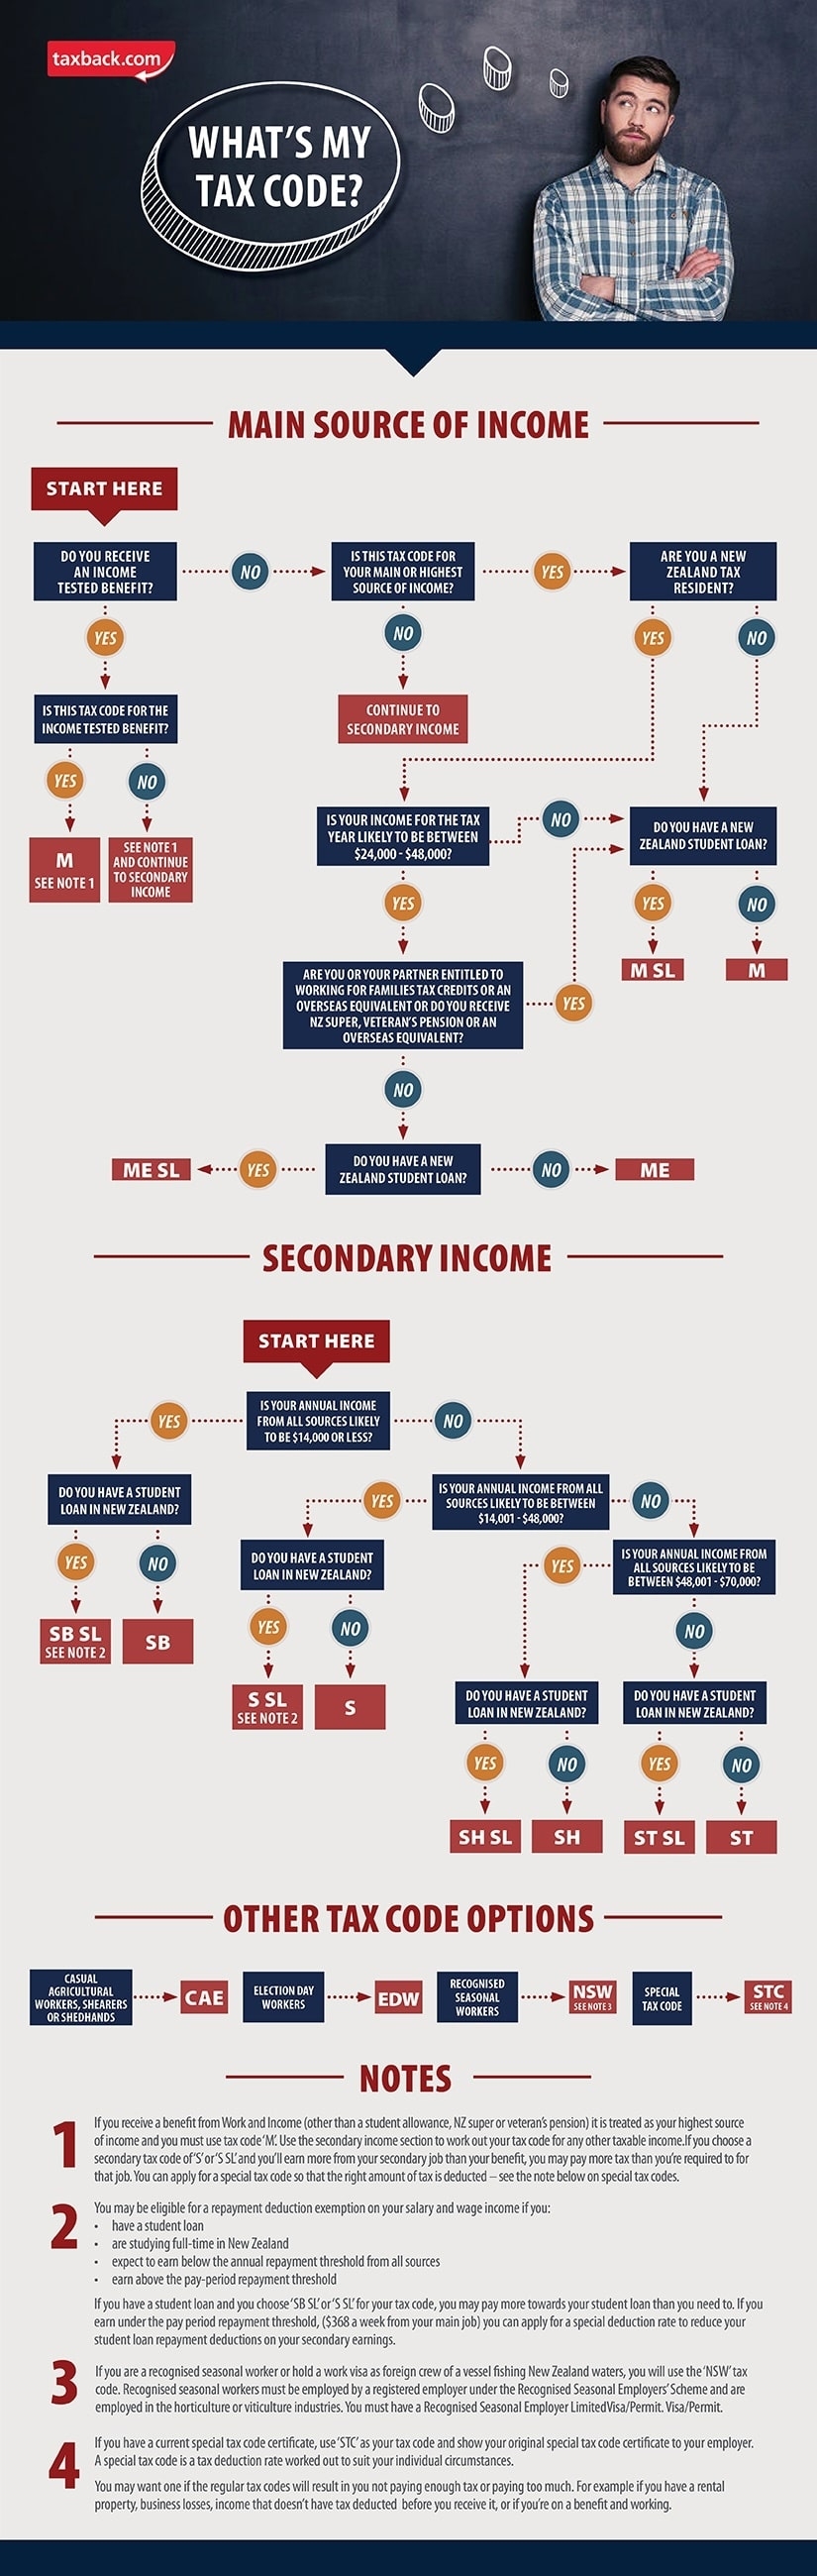 To find out what tax code applies to you check out the infographic